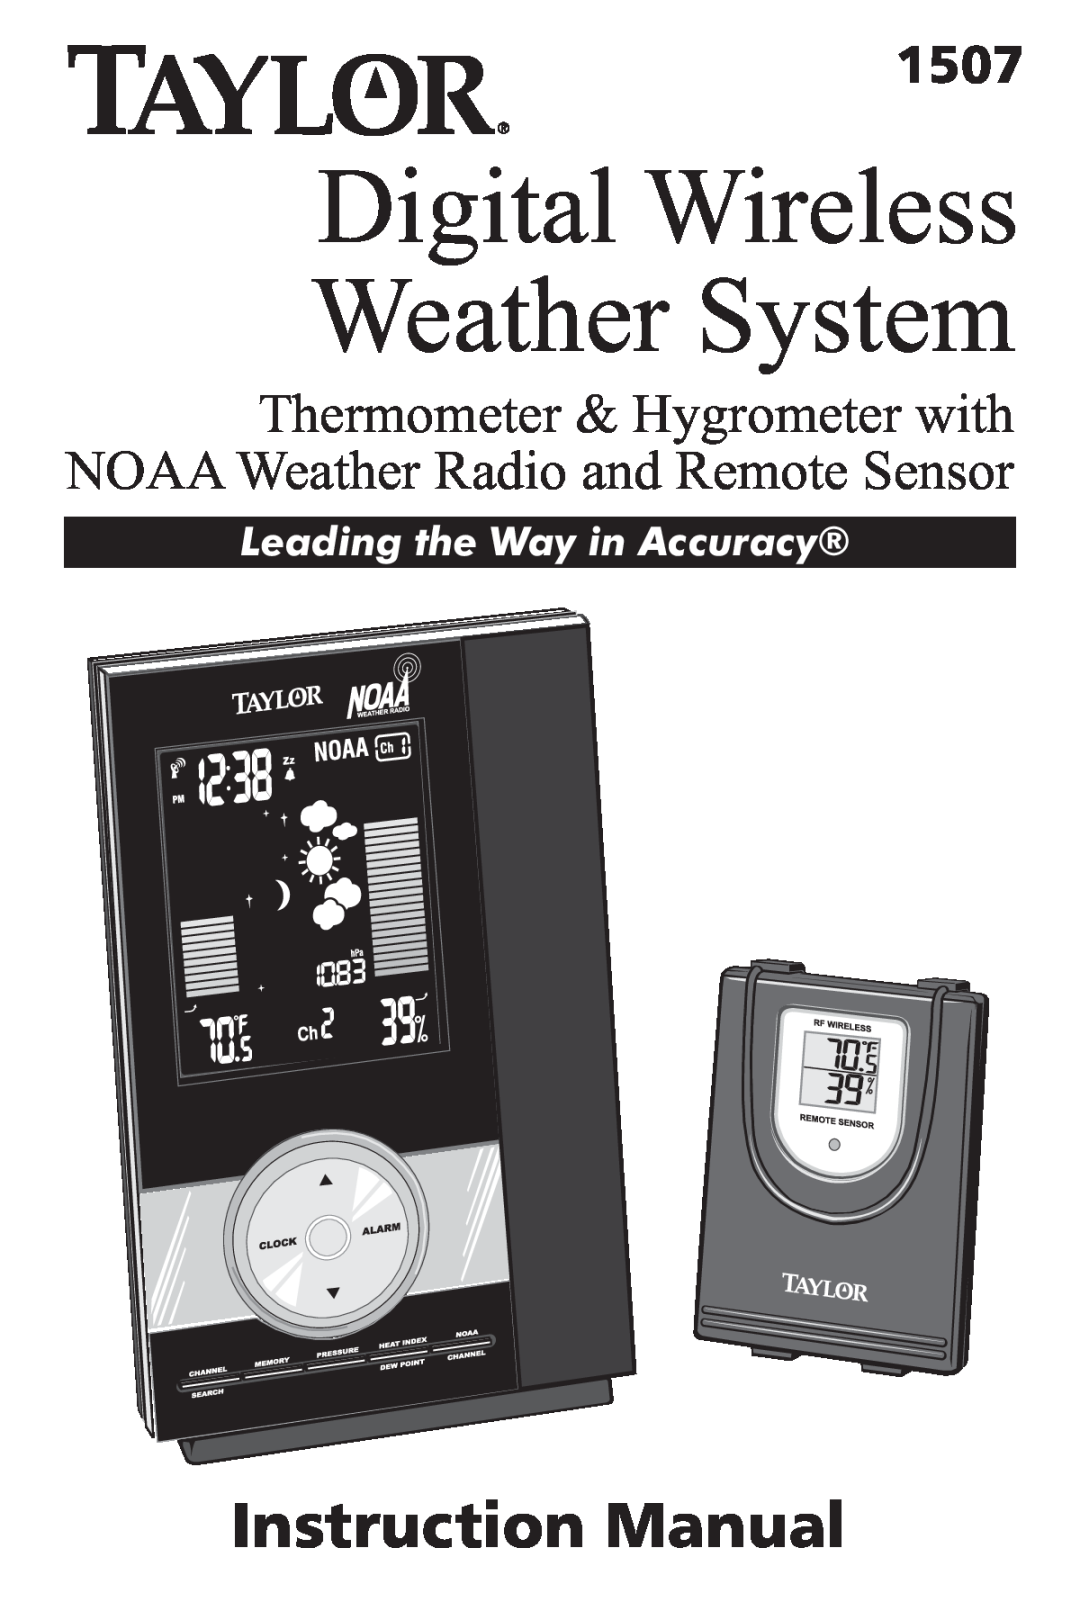 Taylor 1507 instruction manual Digital Wireless Weather System, Leading the Way in Accuracy 